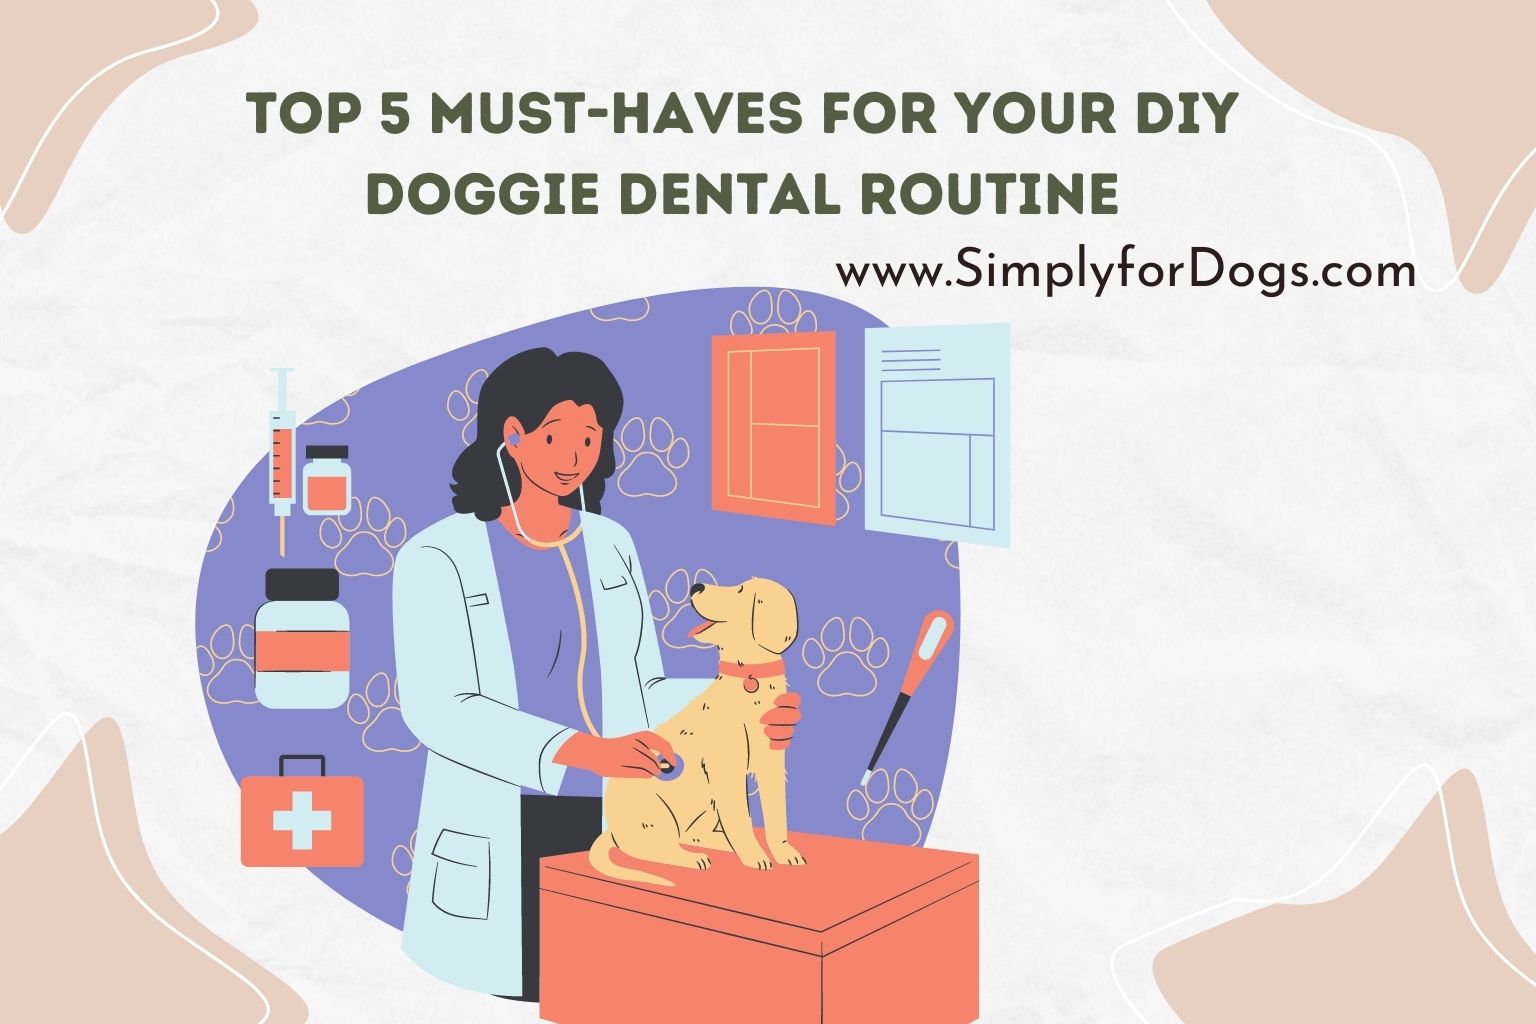 Top 5 Must-Haves for Your DIY Doggie Dental Routine